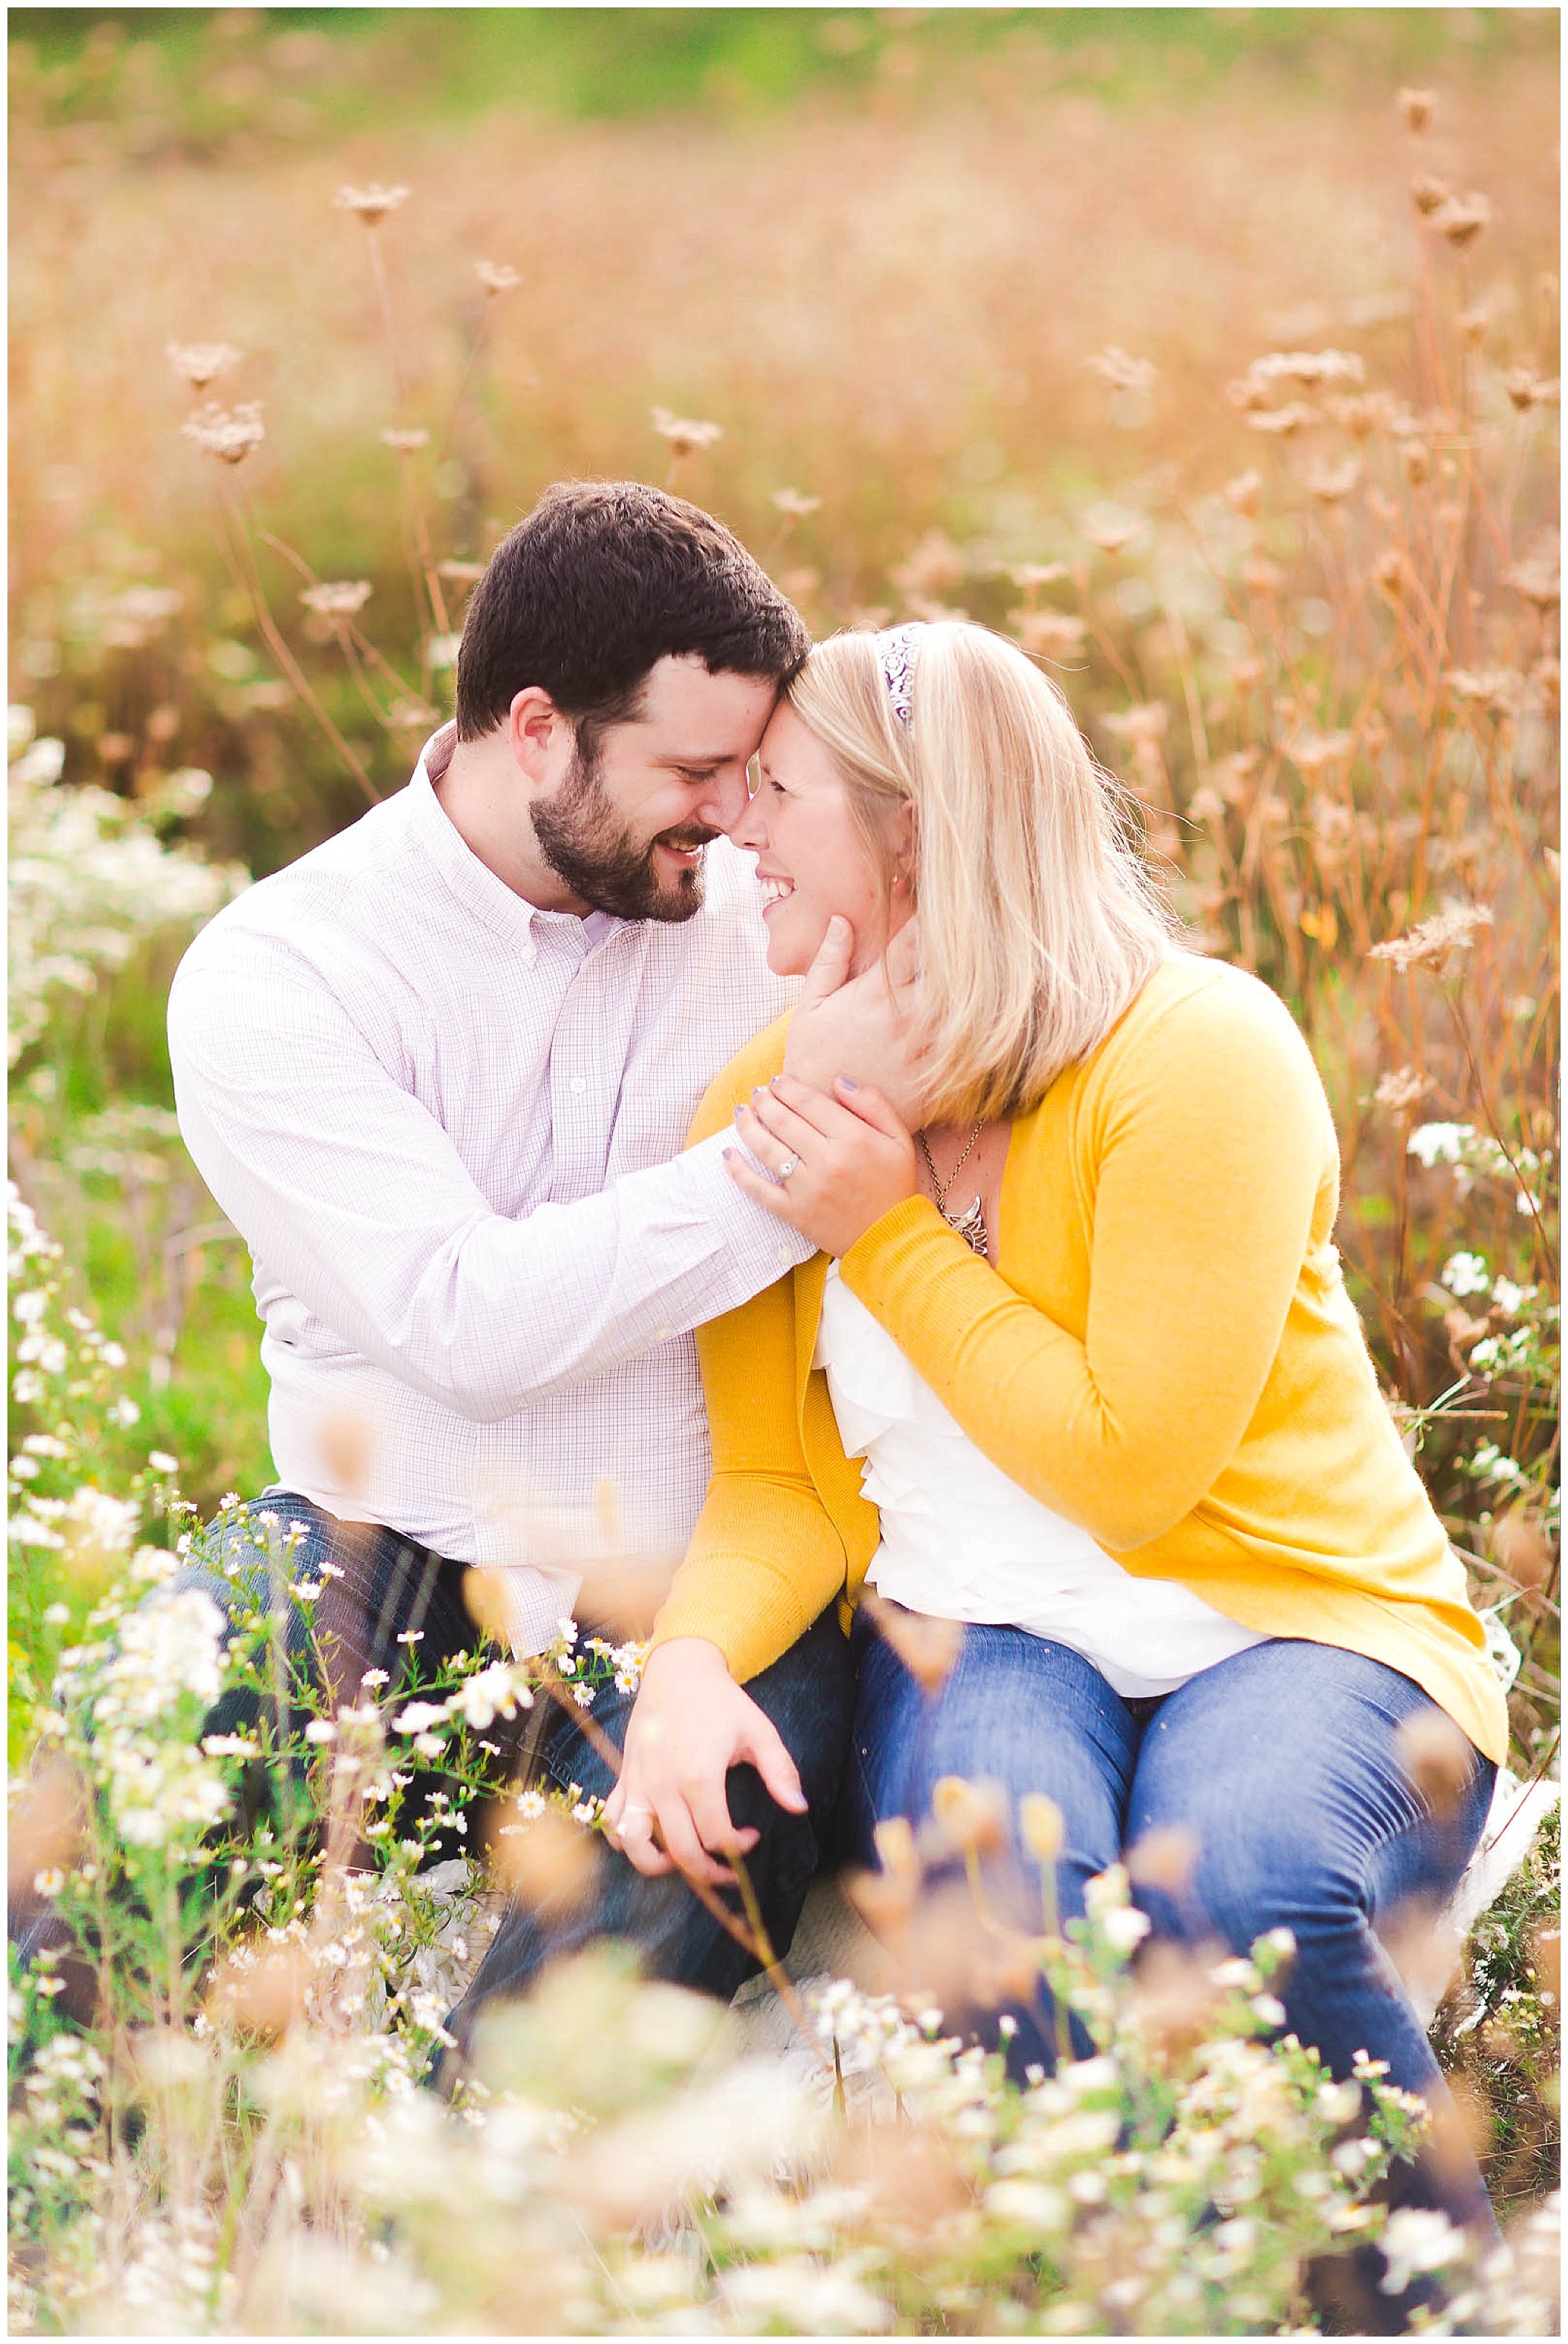 Sunshine filled engagement session in a field of wildflowers, Fort Wayne Indiana Wedding Photographer_0007.jpg